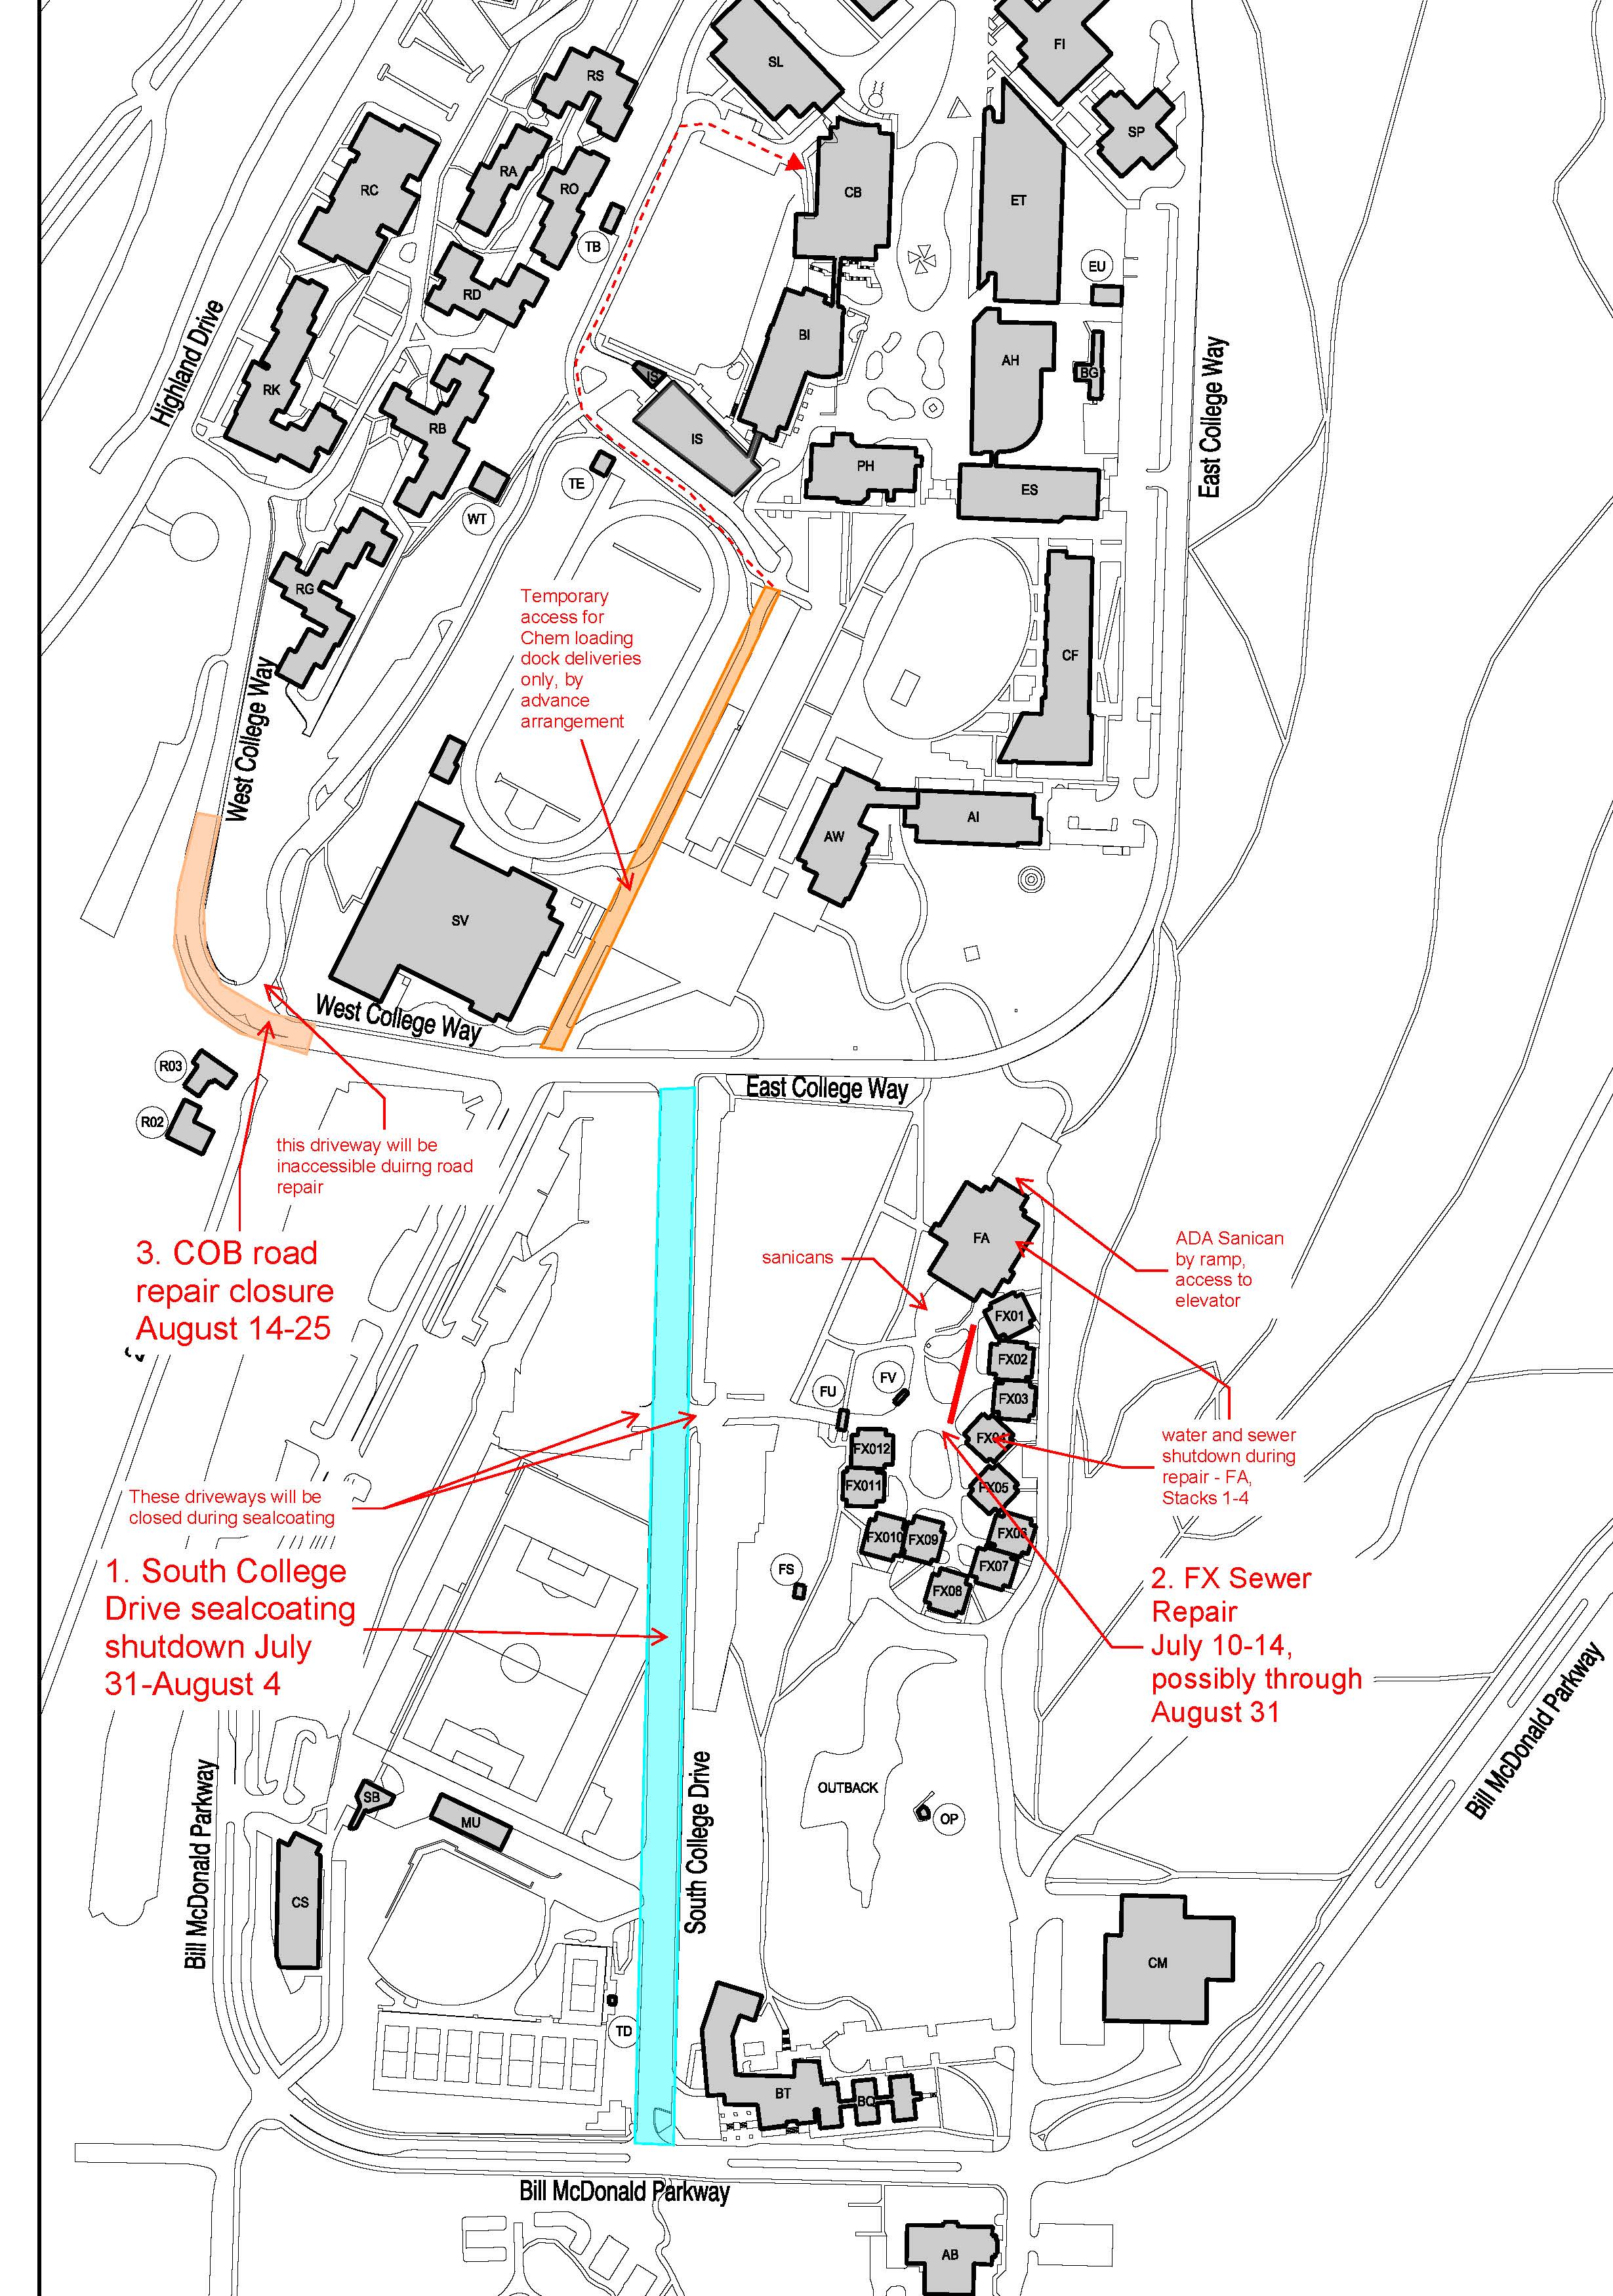 A map of campus with construction areas that are also listed above